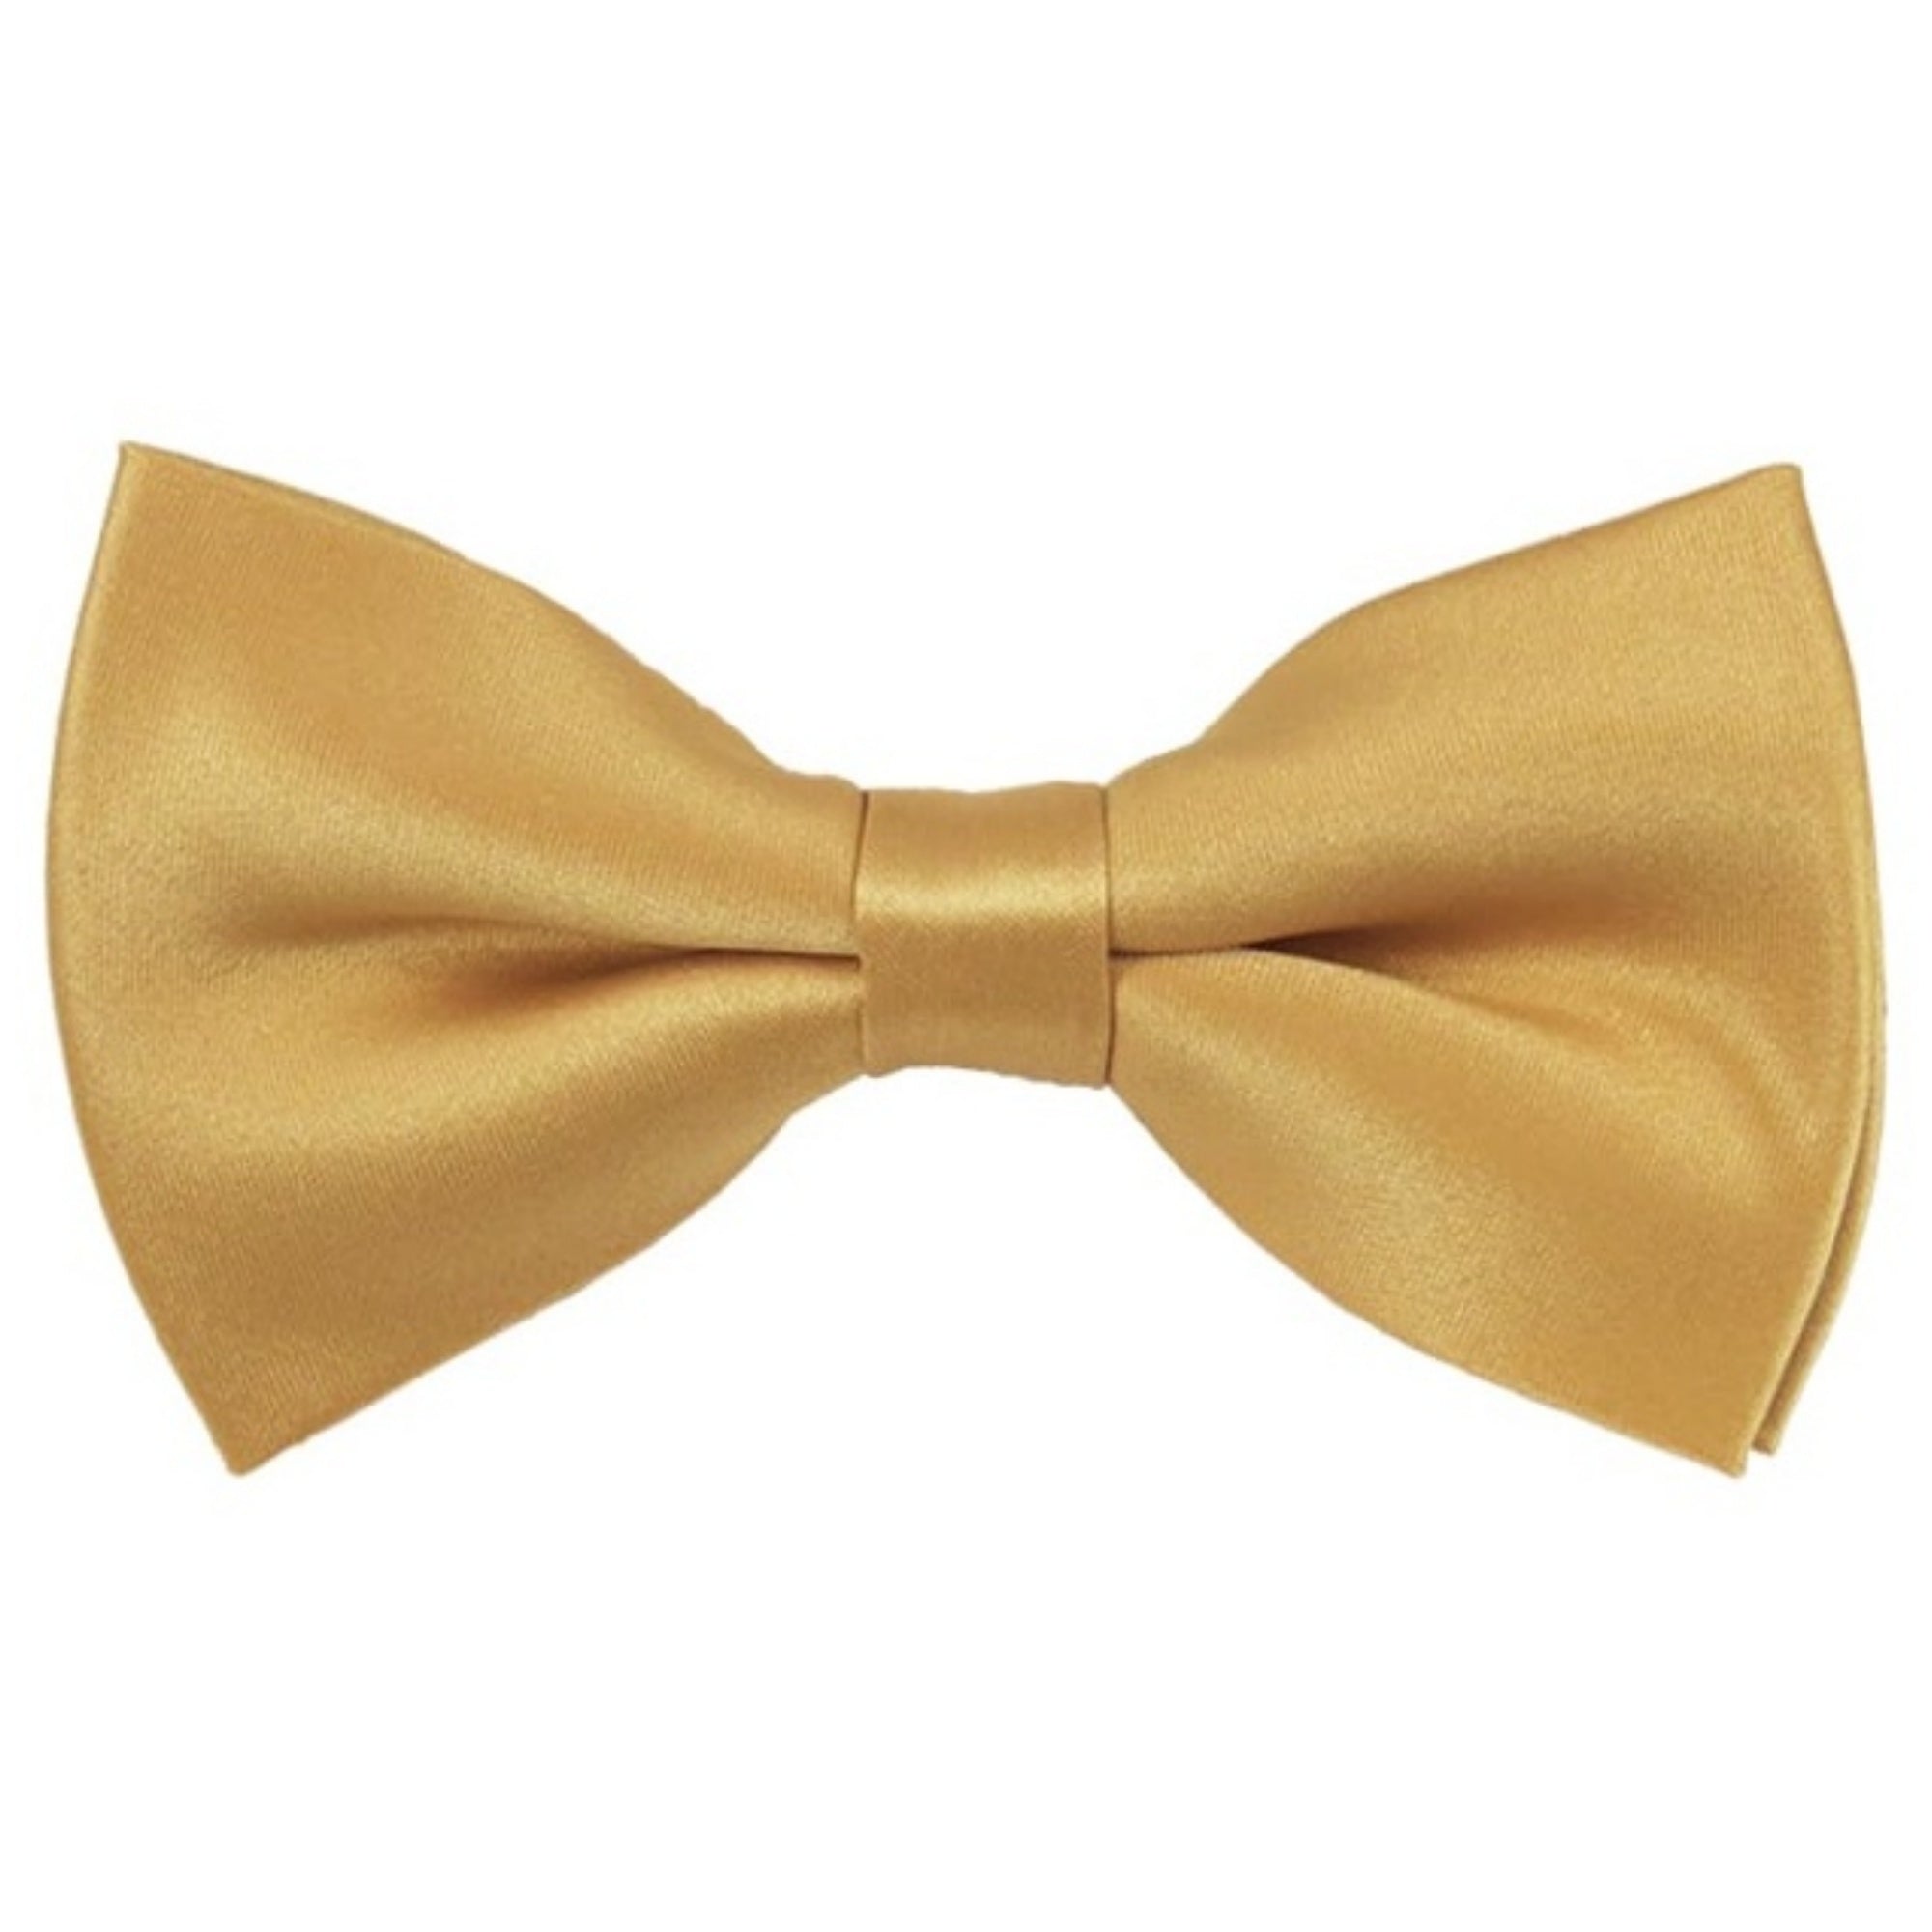 TheDapperTie Men's Solid Color 2.5 W And 4.5 L Inch Pre-Tied adjustable Bow Ties Men's Solid Color Bow Tie TheDapperTie Honey Gold  